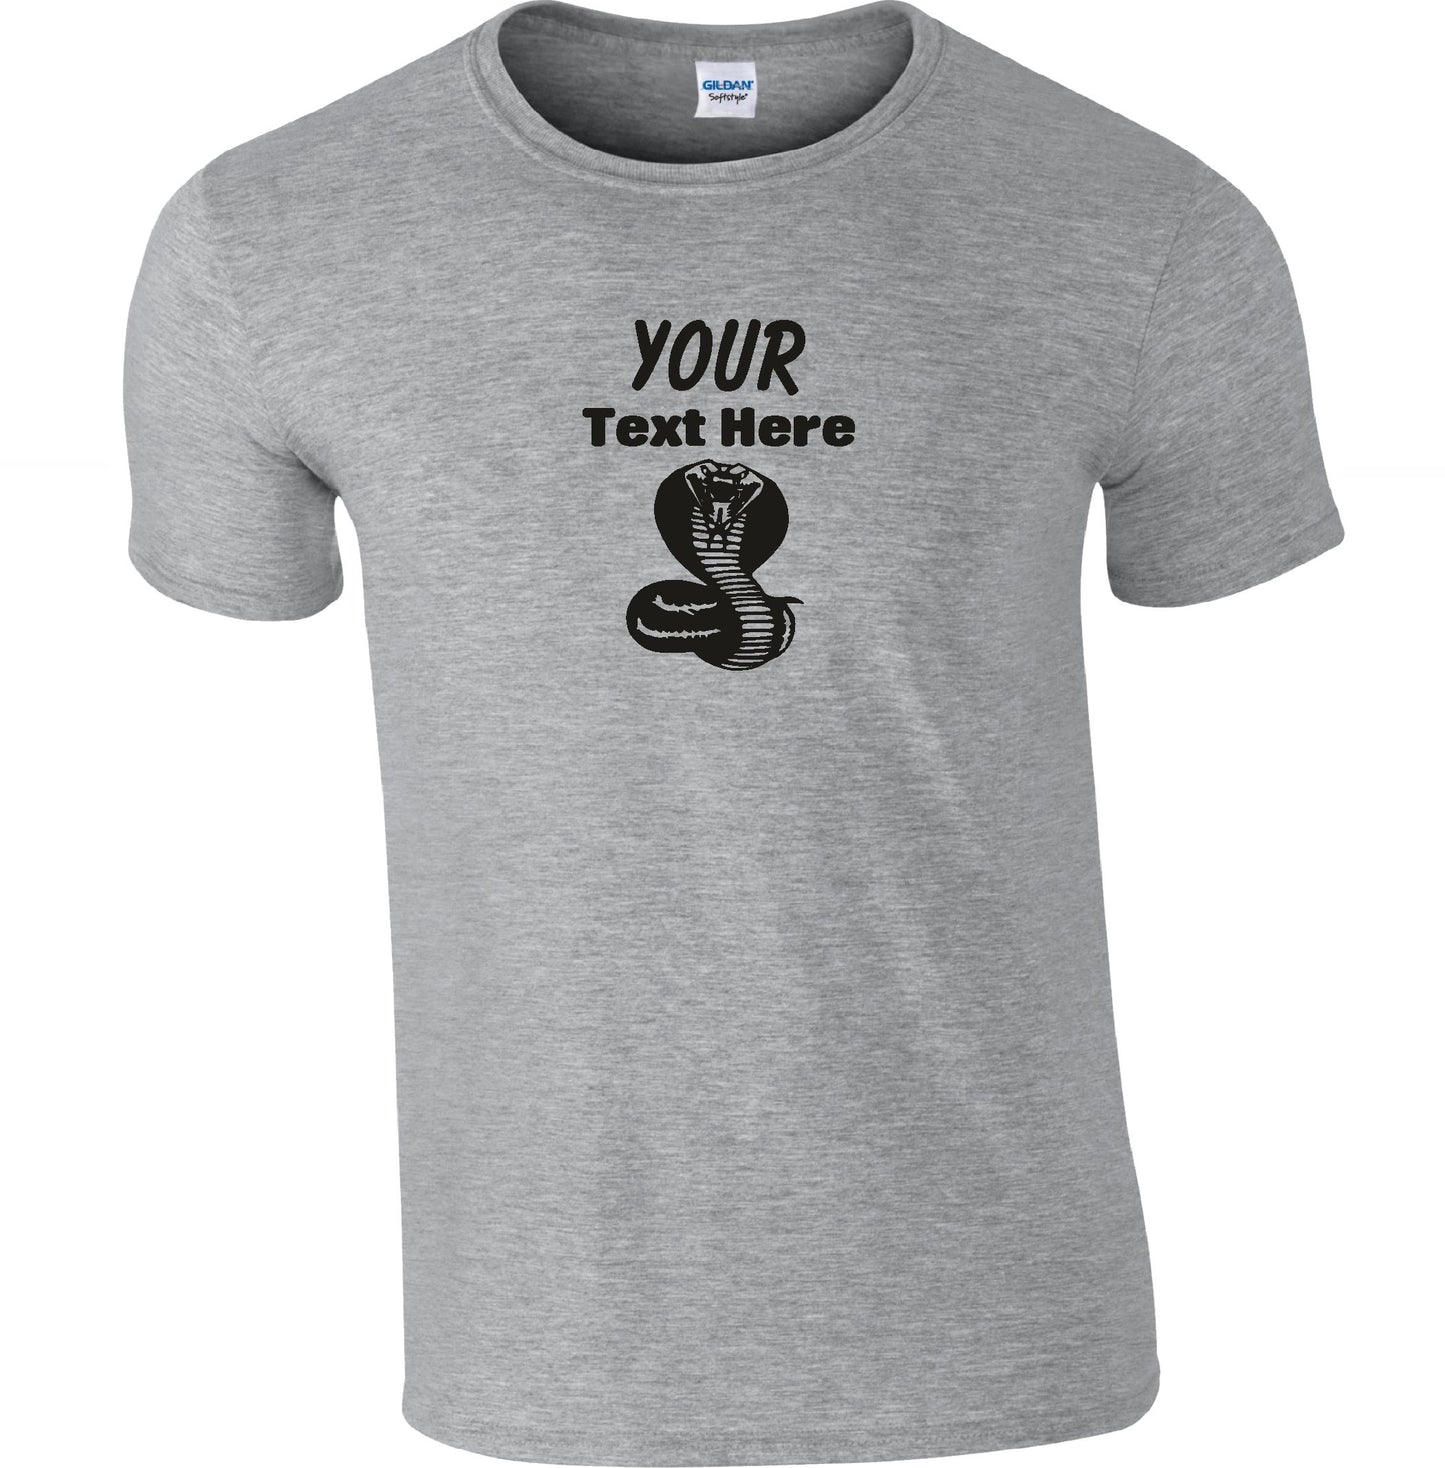 Personalised Custom Cobra T-Shirt - Add Your Own Text, Various Colours